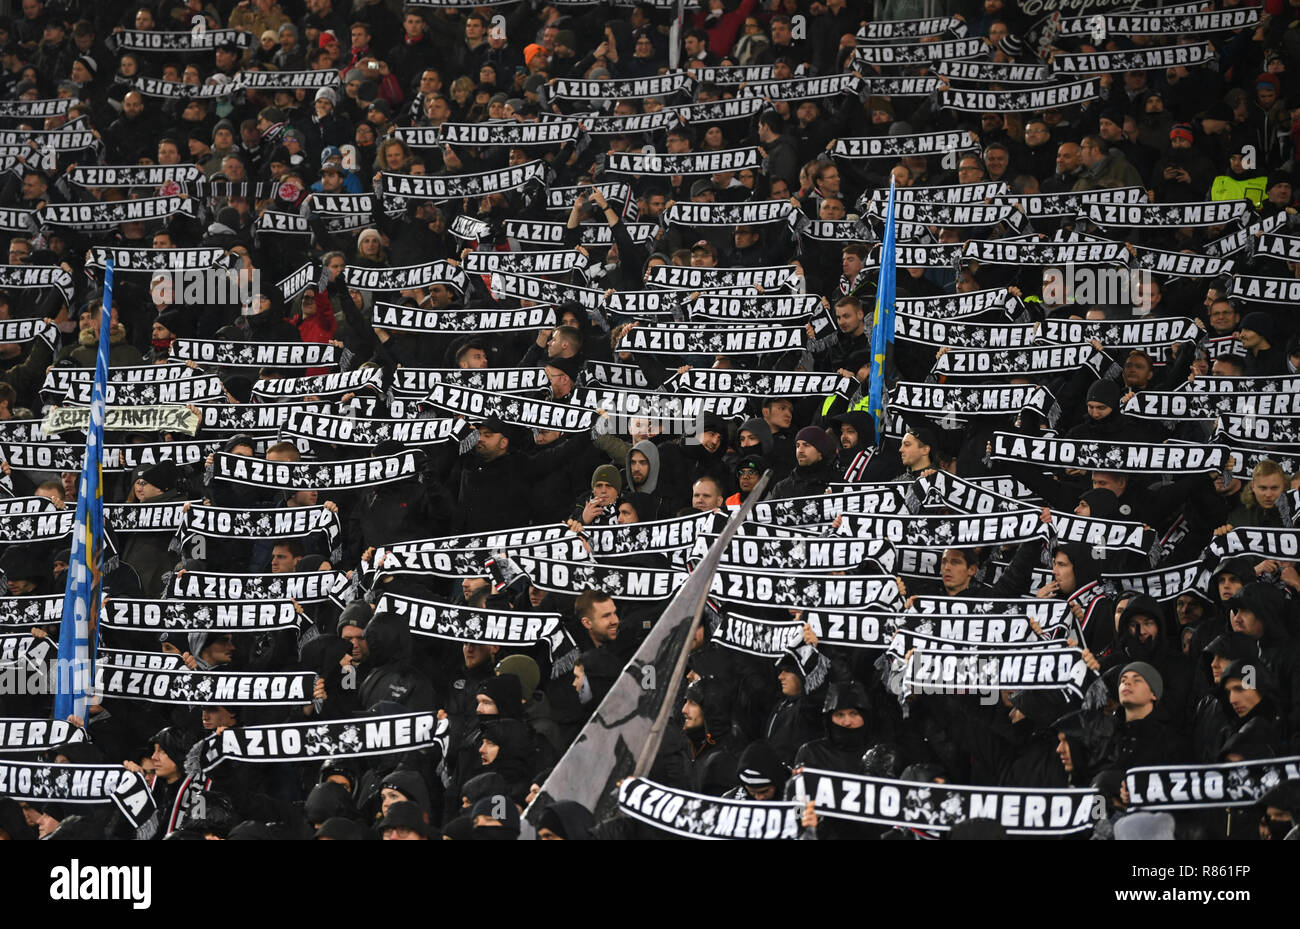 Rome, Italy. 13th Dec, 2018. Soccer: Europa League, Lazio Rome - Eintracht Frankfurt, Group stage, Group H, 6th matchday in the Olympic Stadium. The Frankfurt fans hold up scarves with the inscription 'Lazio Merda' before the game. Credit: Arne Dedert/dpa/Alamy Live News Stock Photo